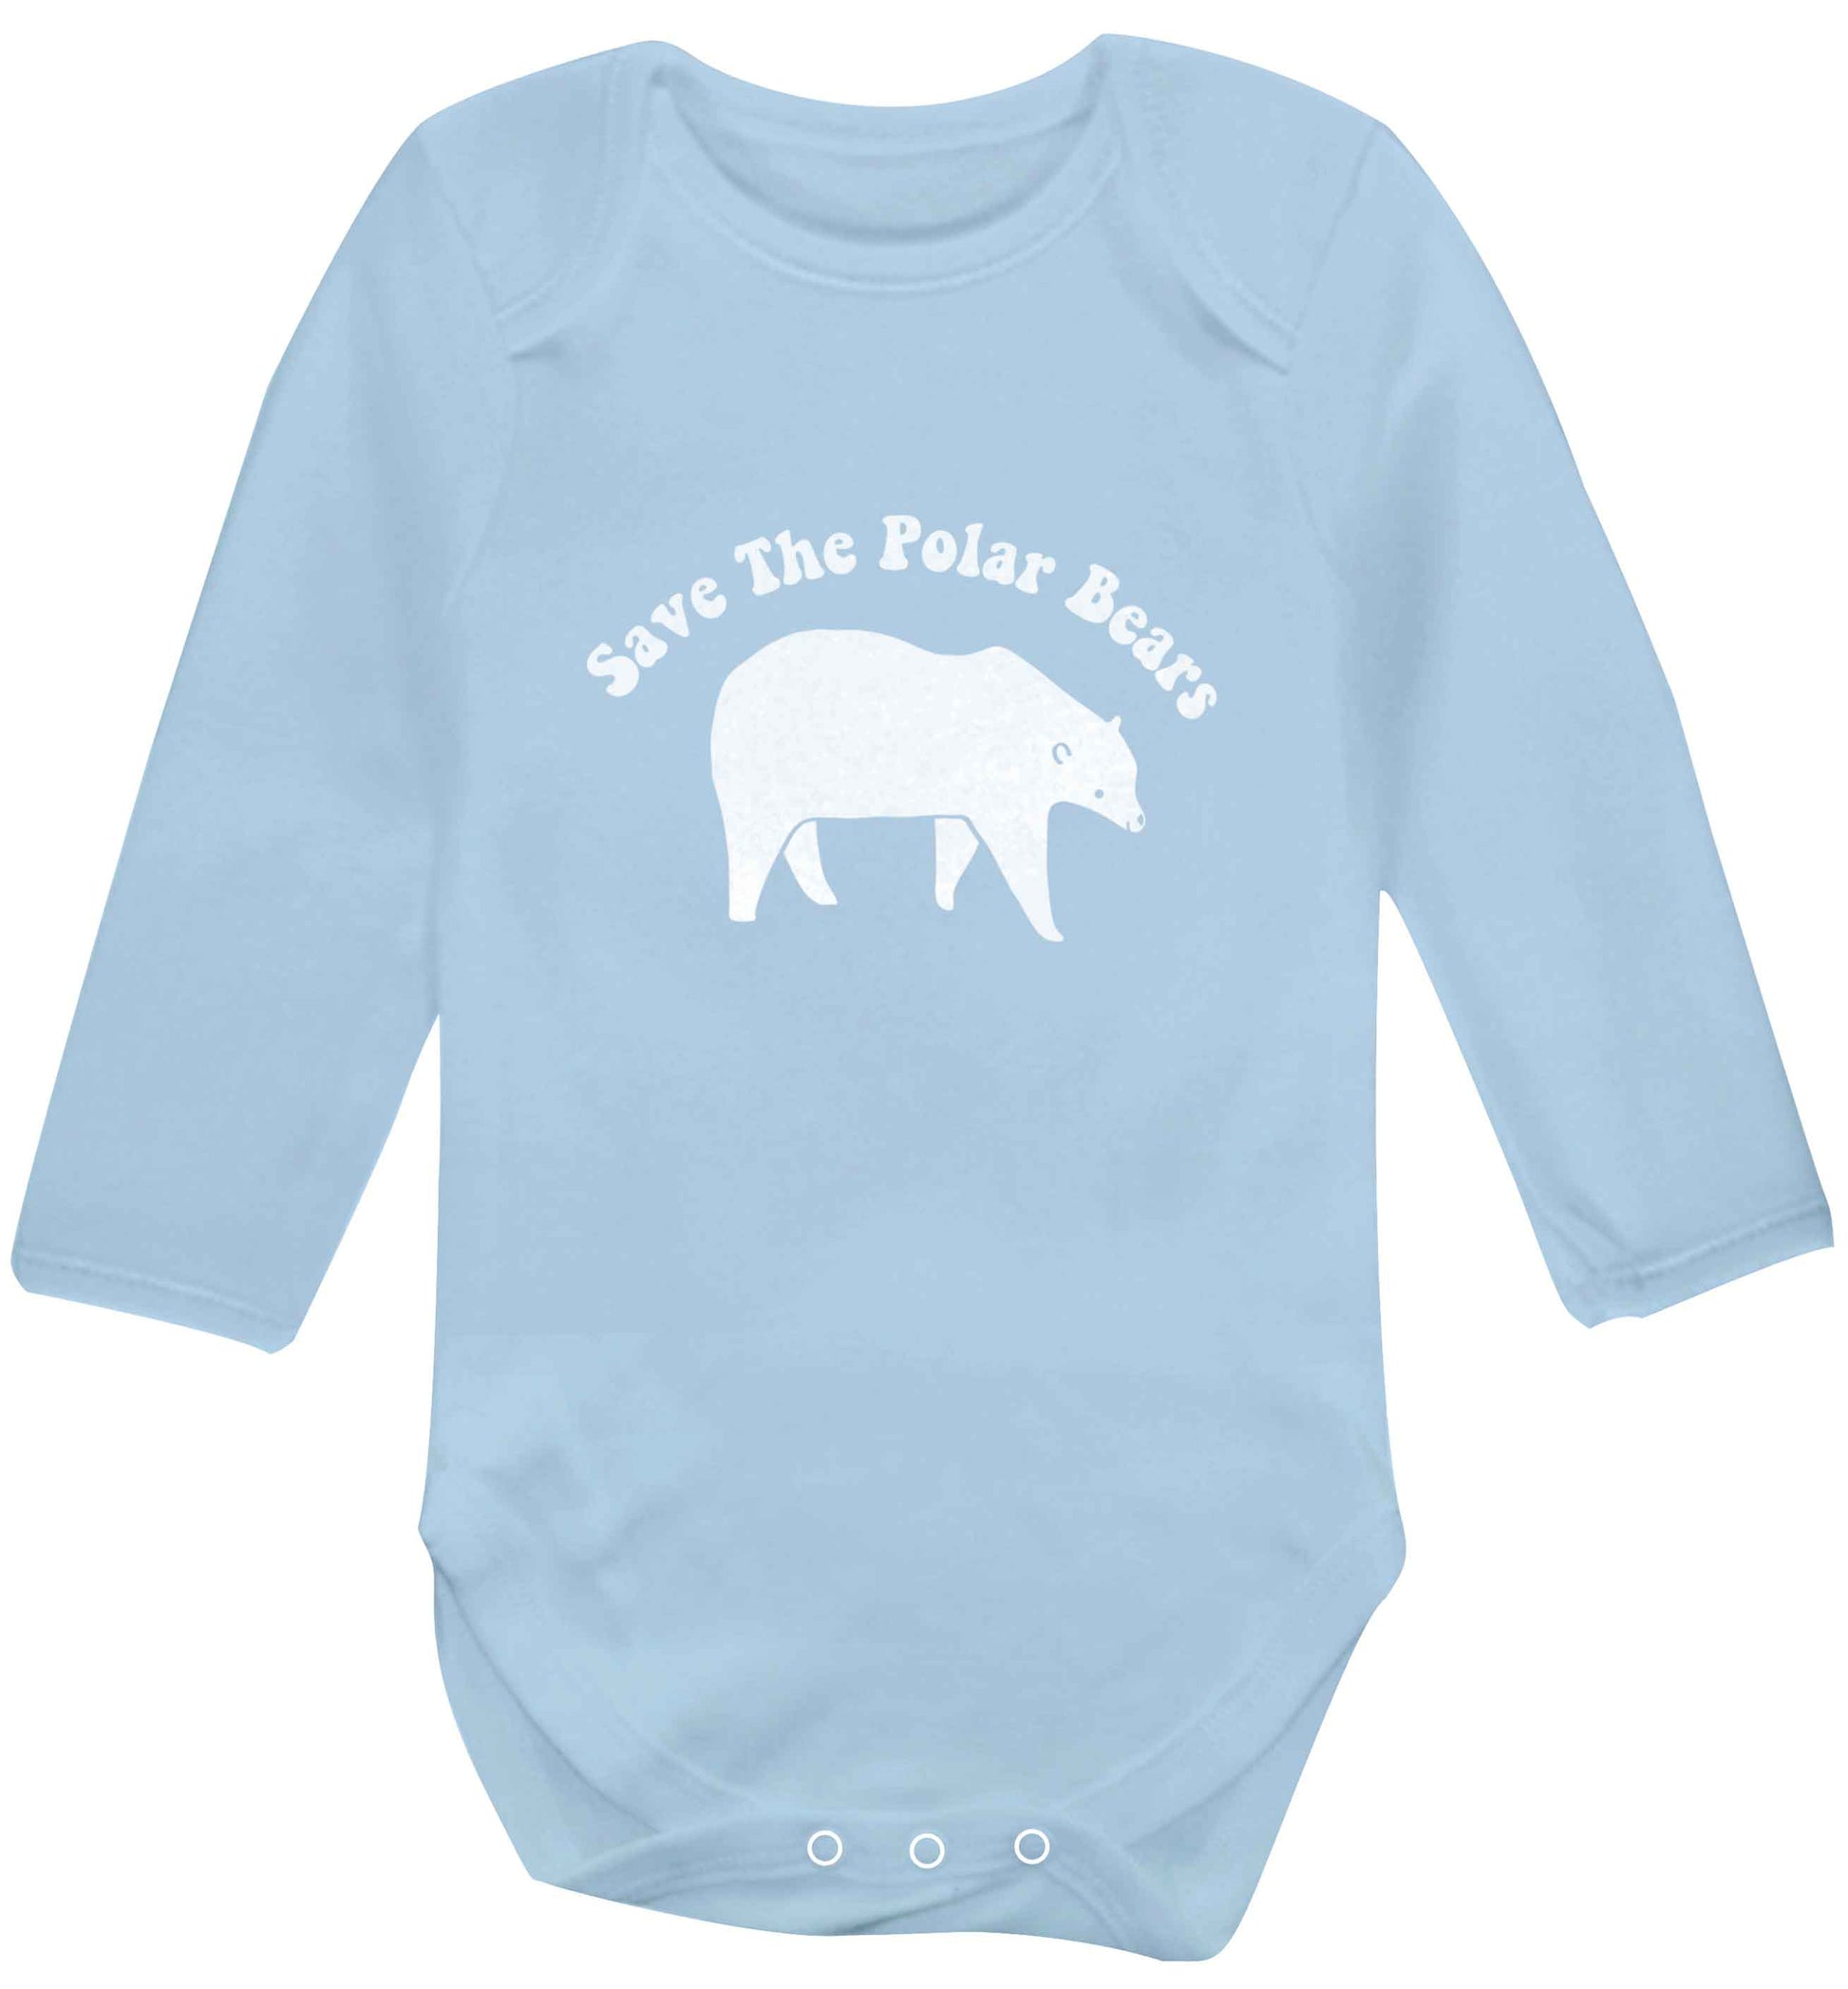 Save The Polar Bears baby vest long sleeved pale blue 6-12 months